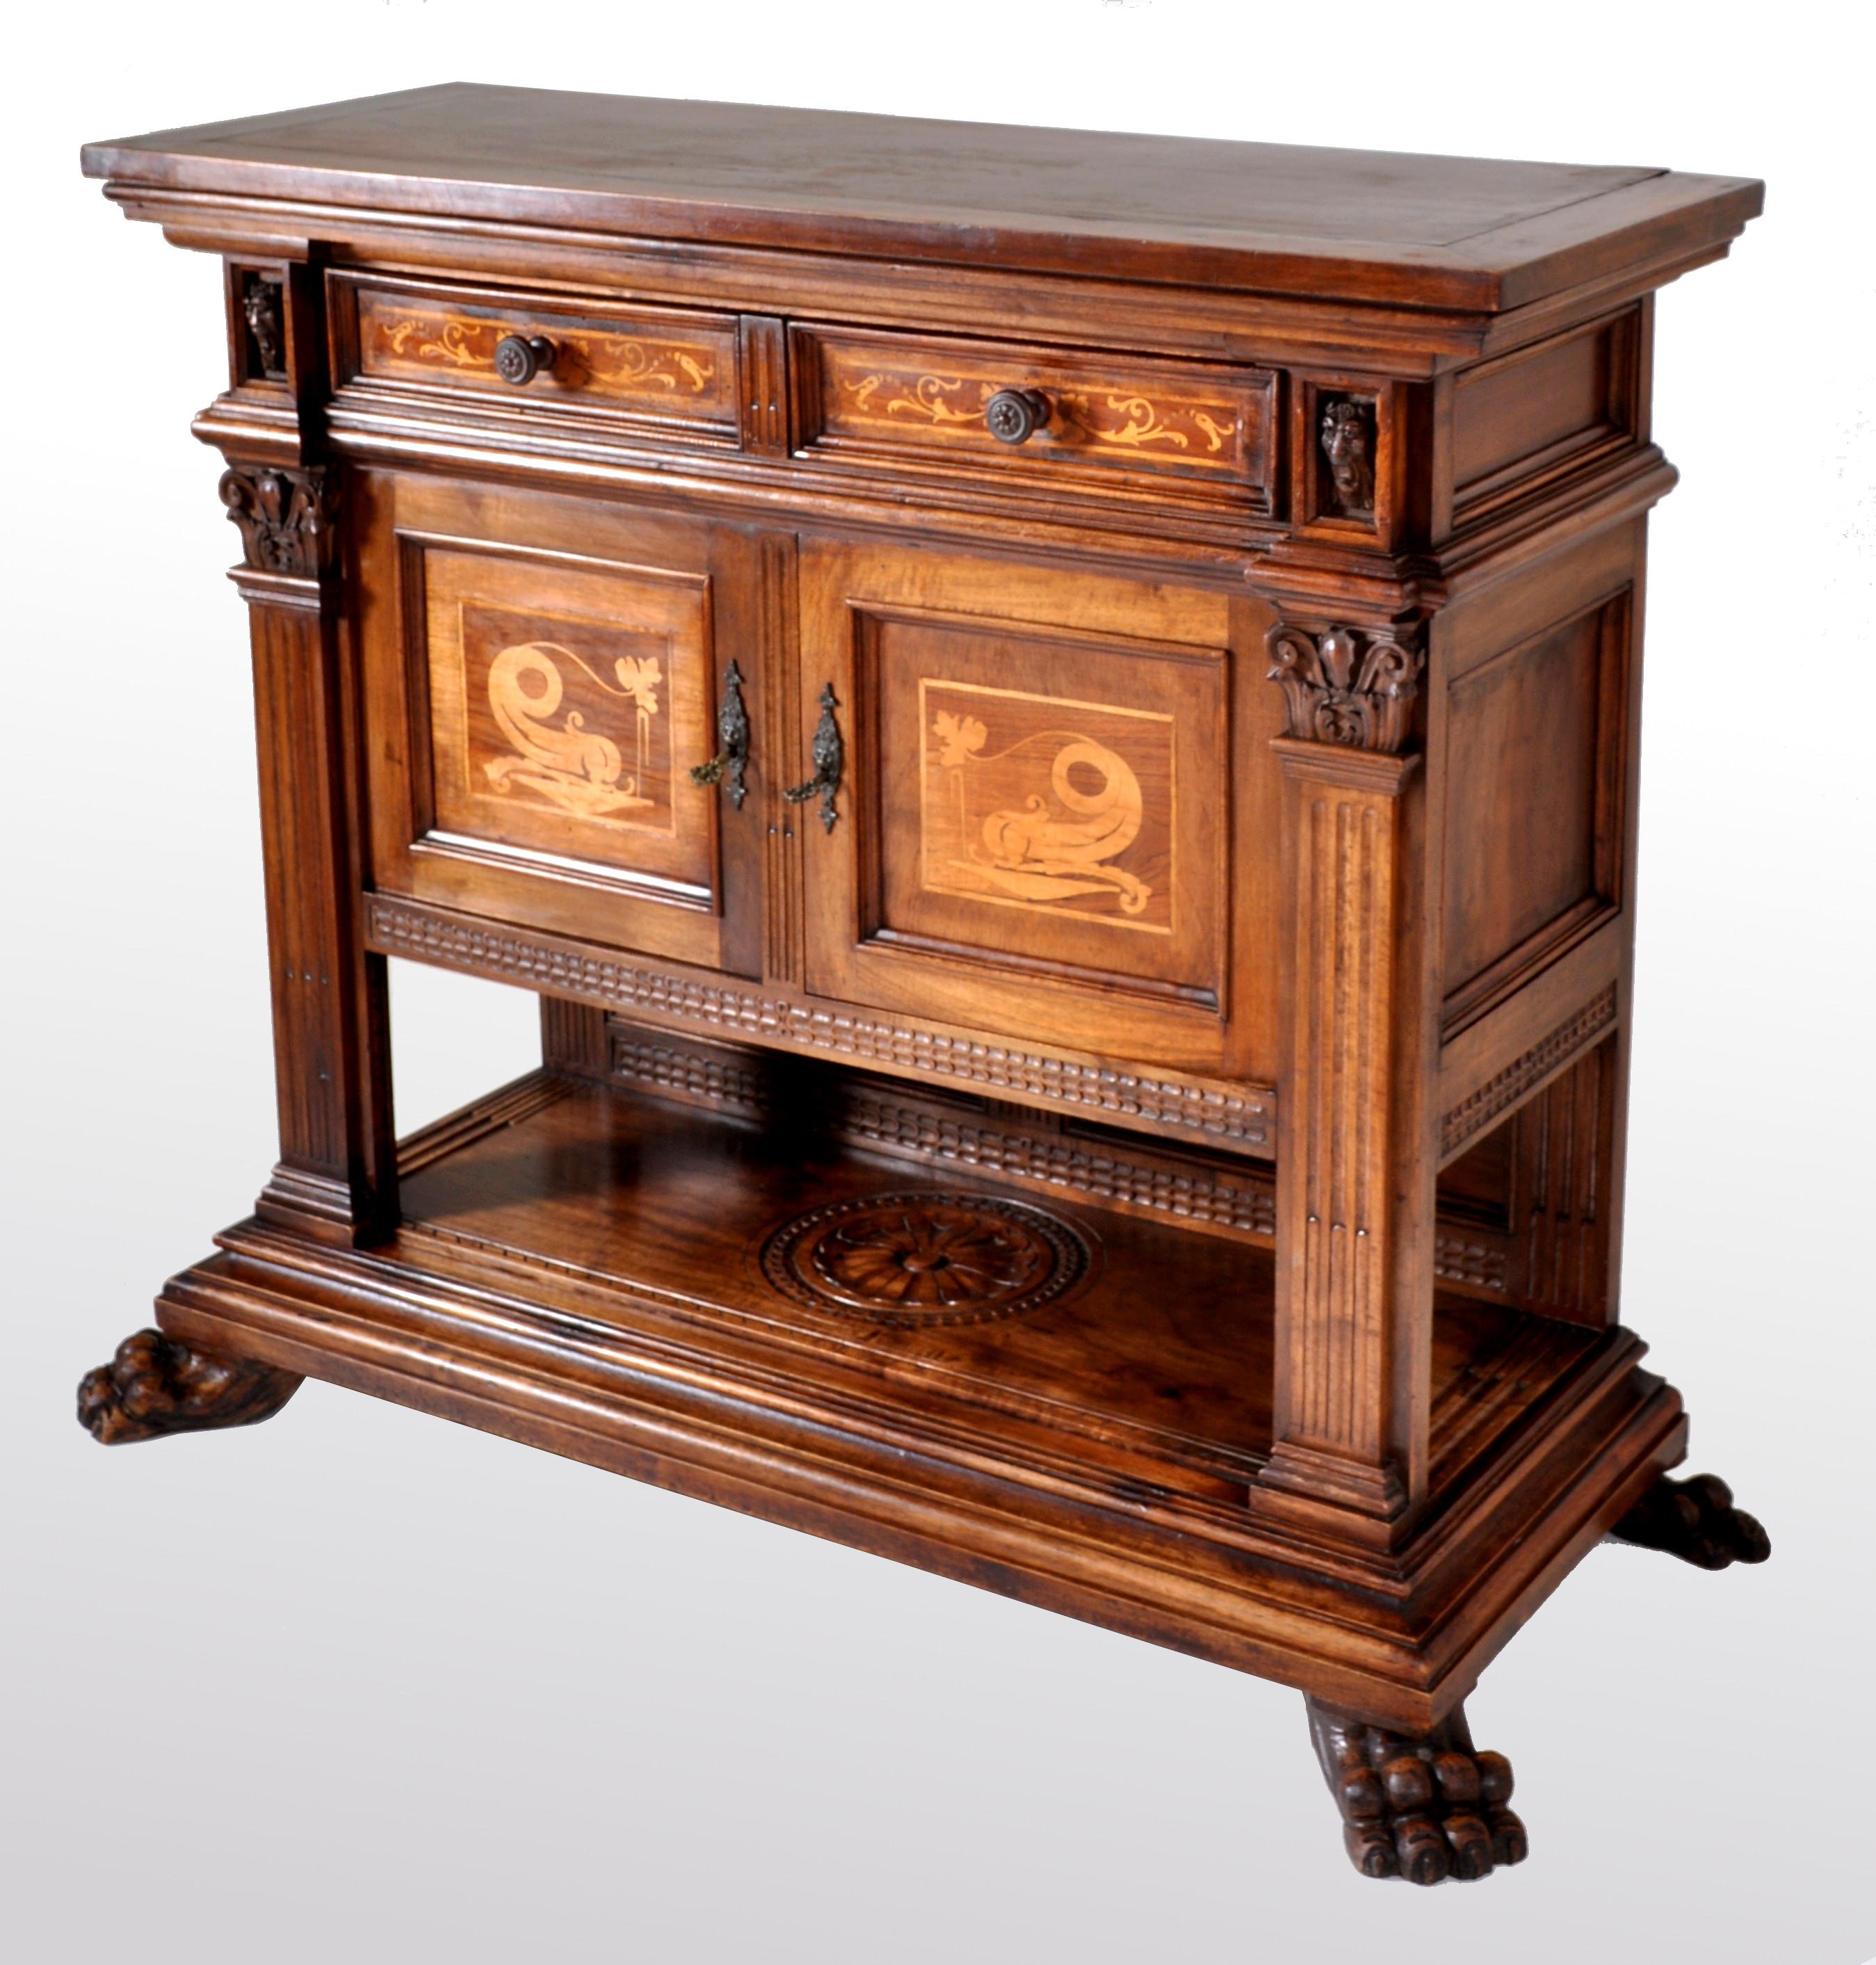 Hand-Carved Antique Italian Renaissance Revival Walnut Marquetry Sideboard/Server circa 1880